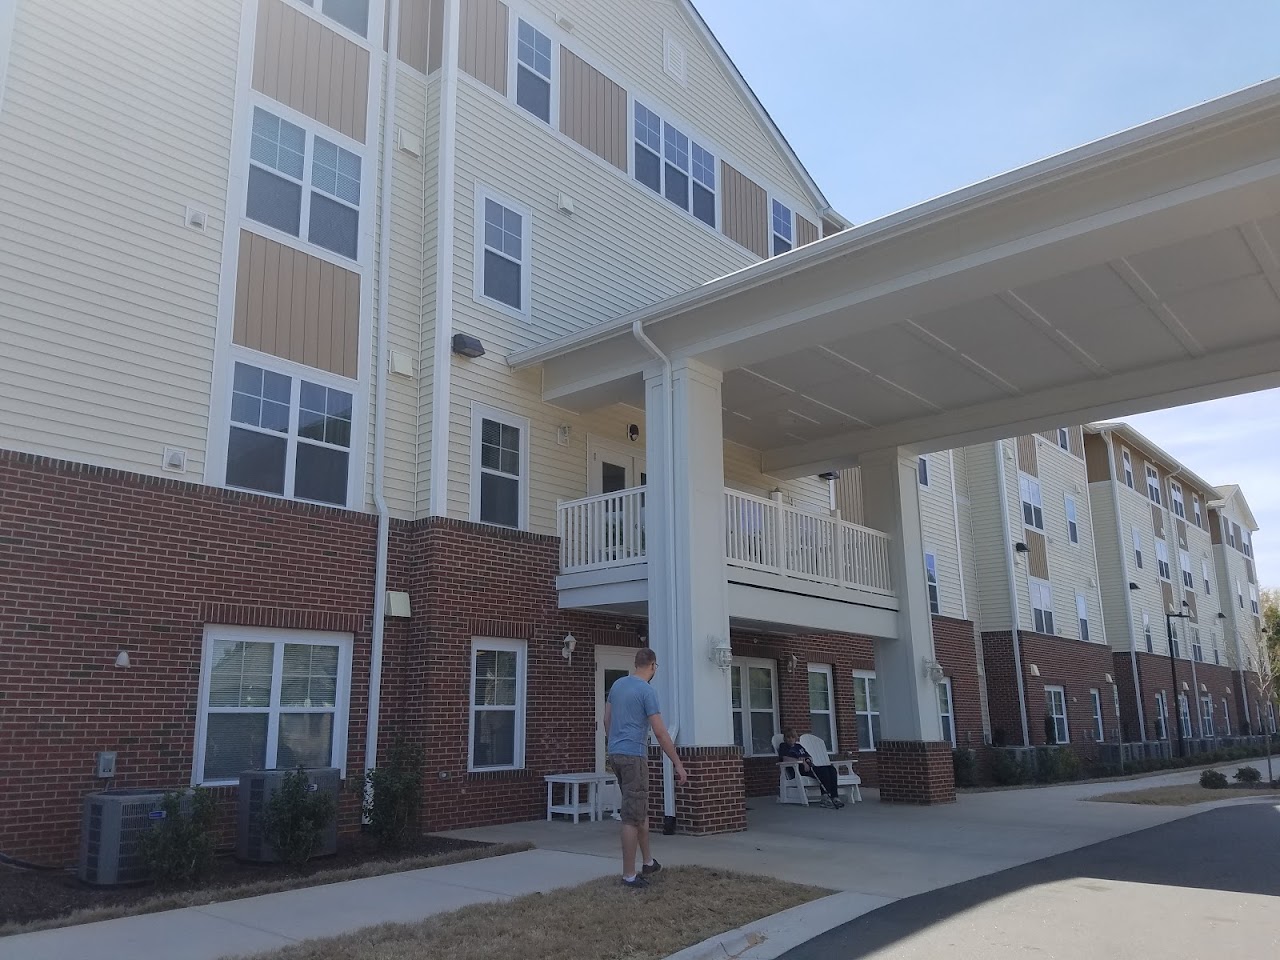 Photo of WAKEFIELD SPRING. Affordable housing located at 2701 WAKEFIELD PINES DRIVE RALEIGH, NC 27614